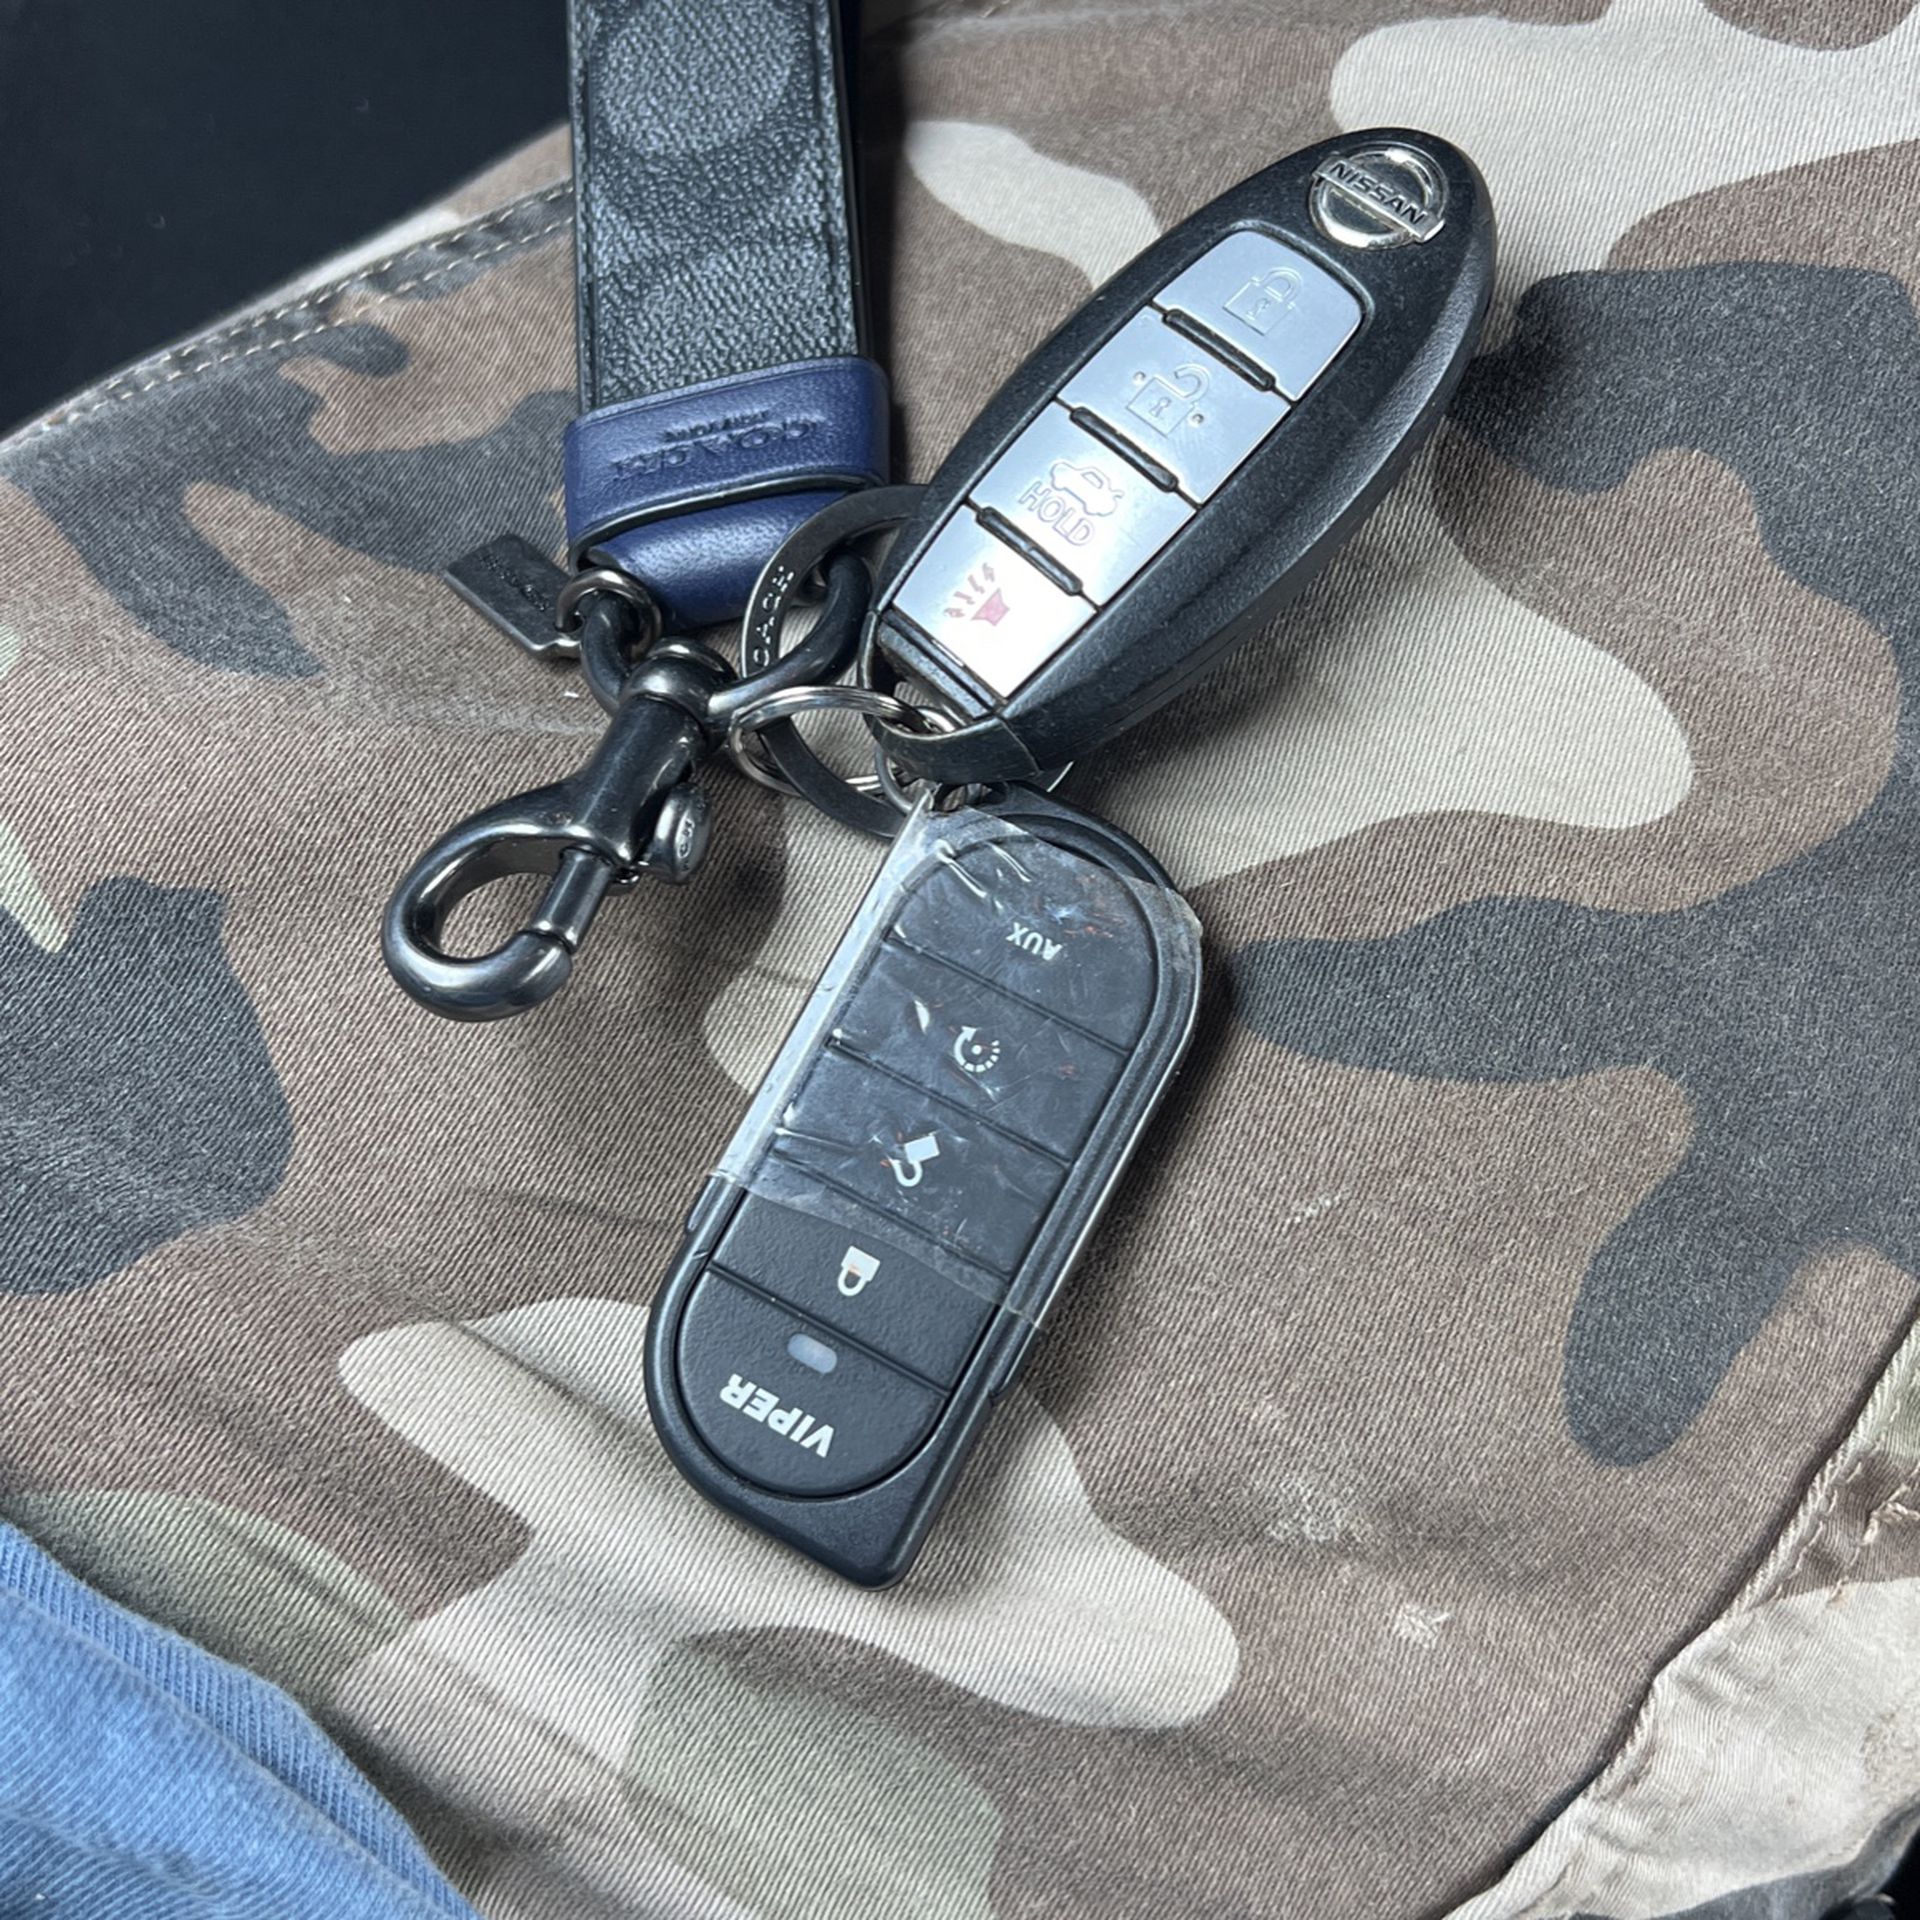 Nissan Altima Push To Start Key Fob And Viper 3 Way Pager